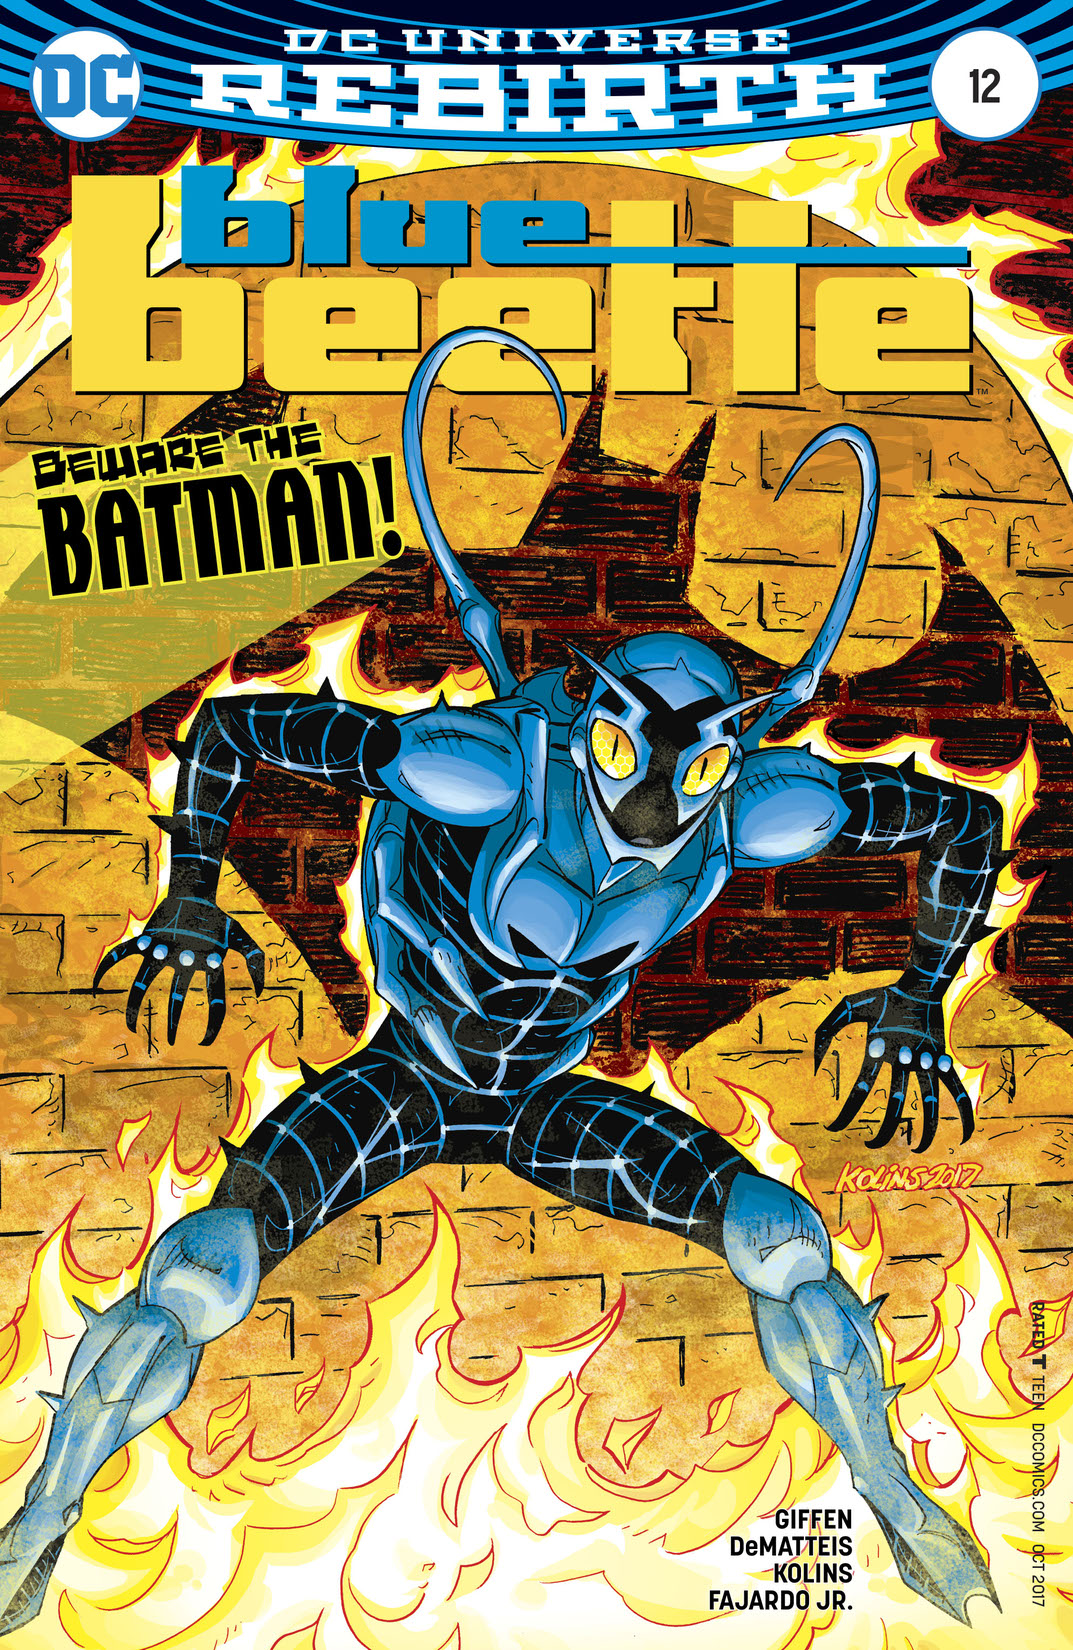 Blue Beetle (2016-) #12 preview images